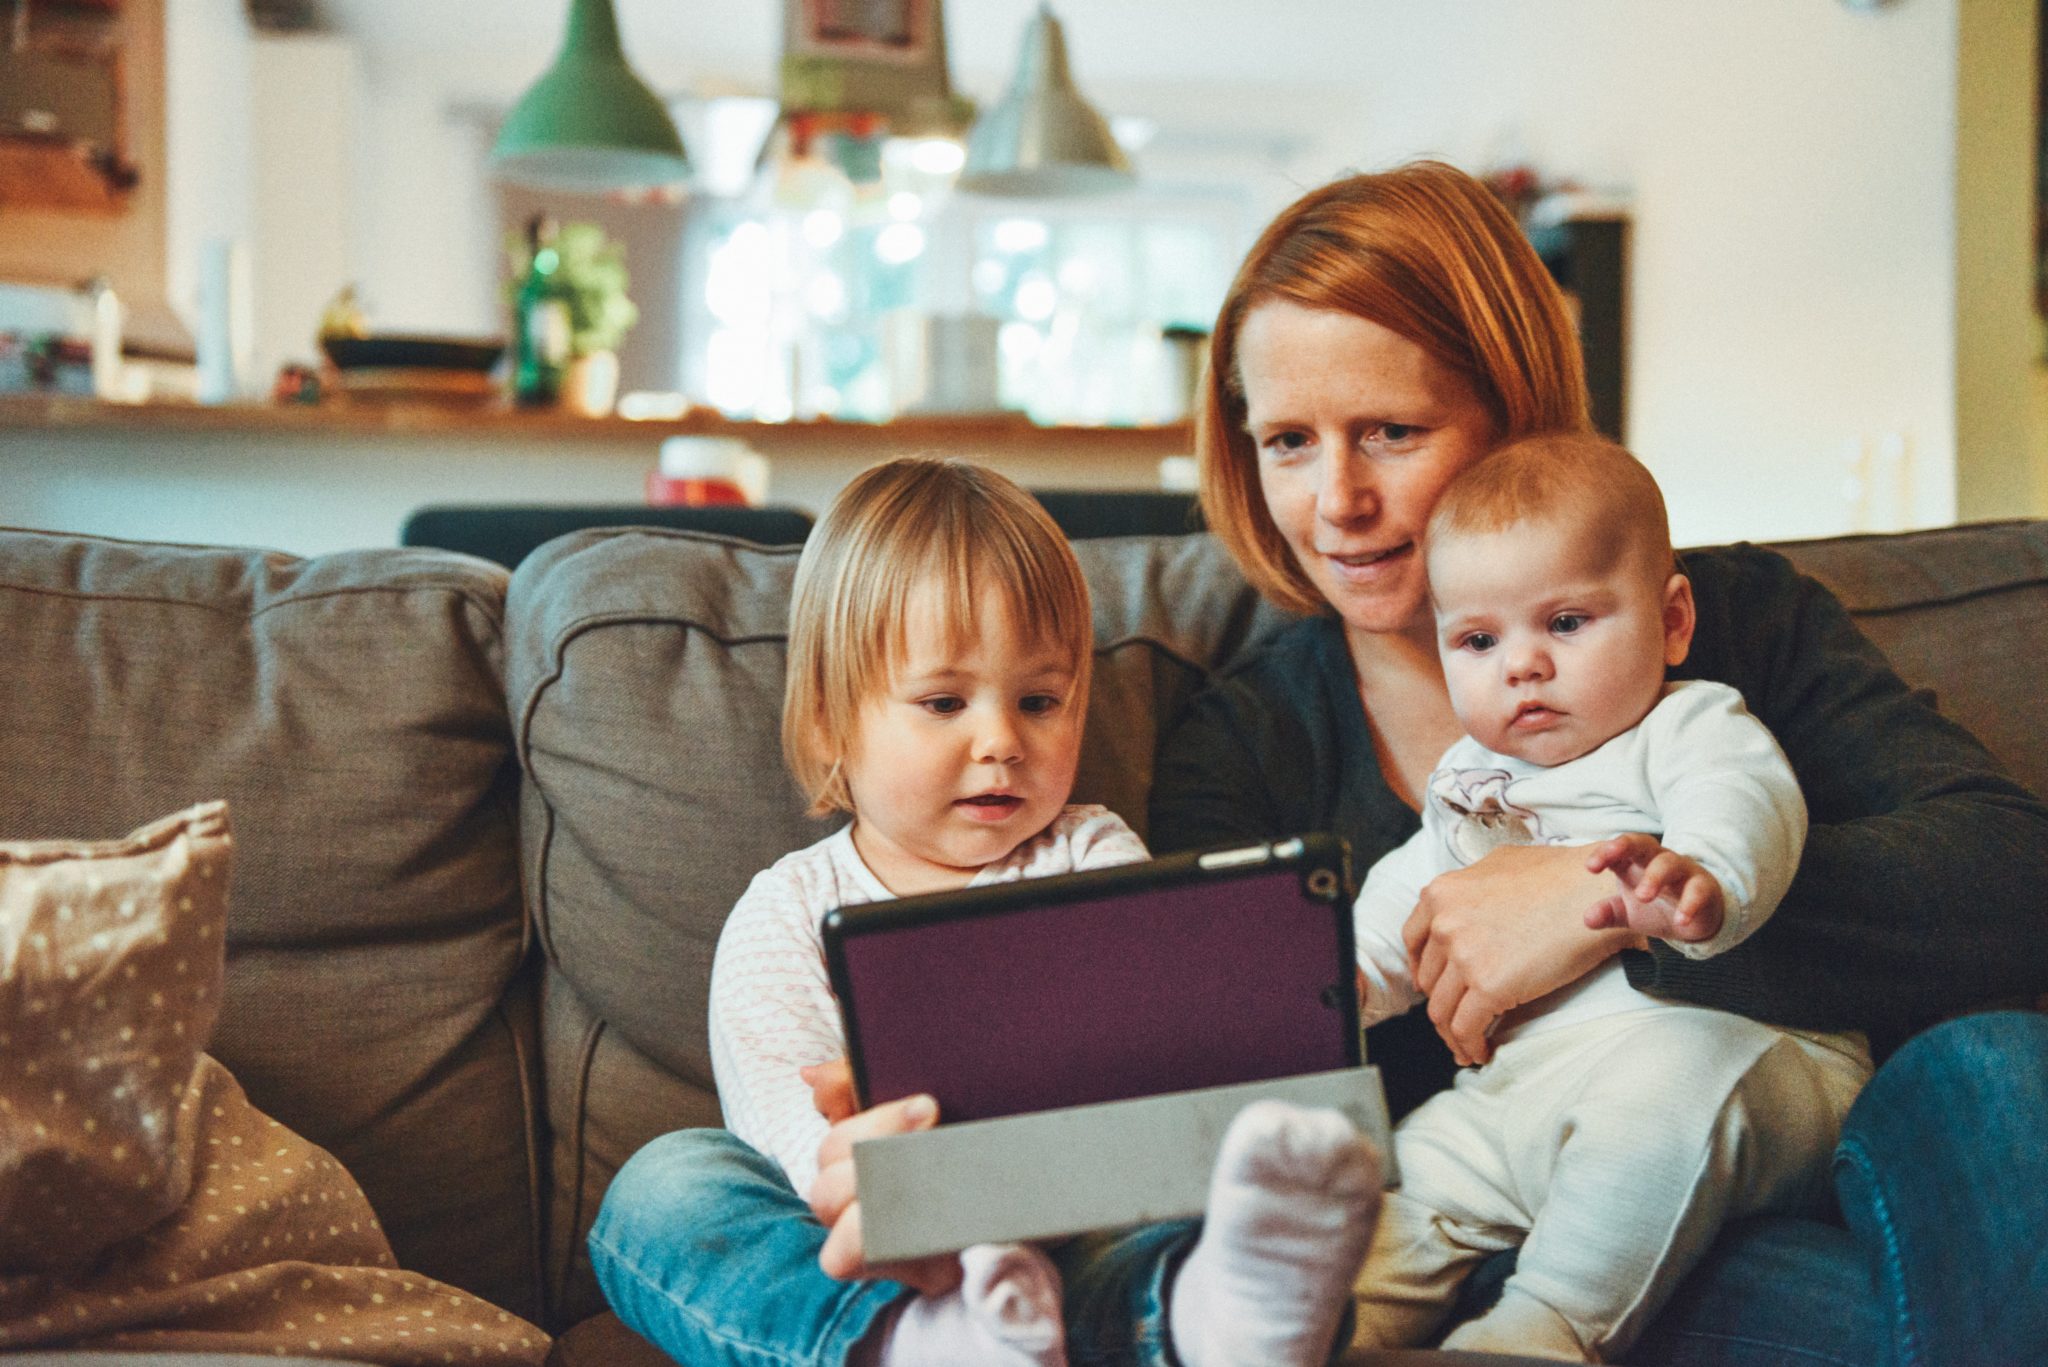 Women with two young kids video chat on a tablet